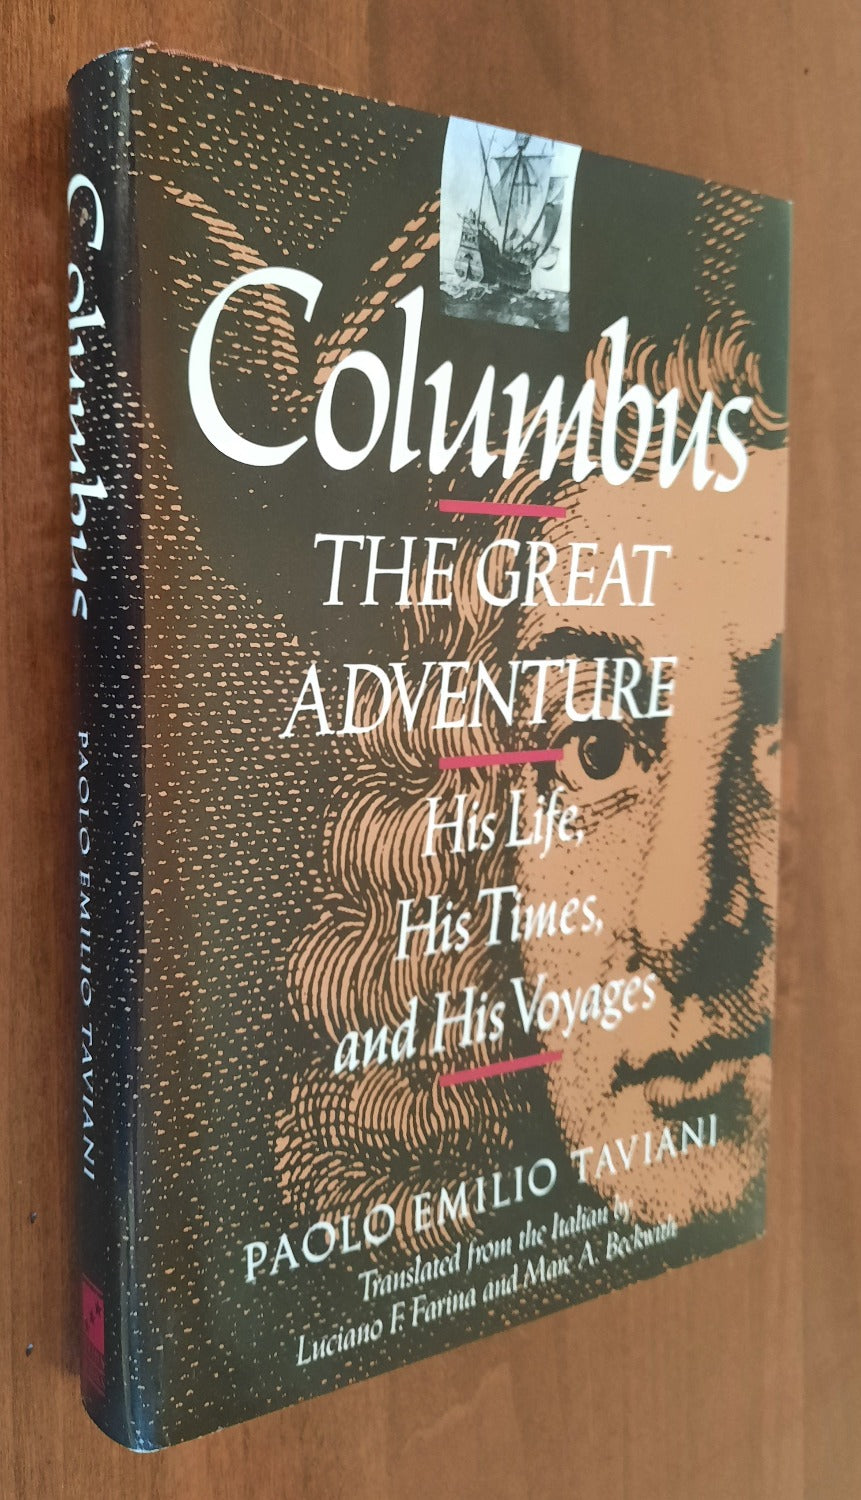 Columbus. The great Adventure. His life, his Times, and his Voyages